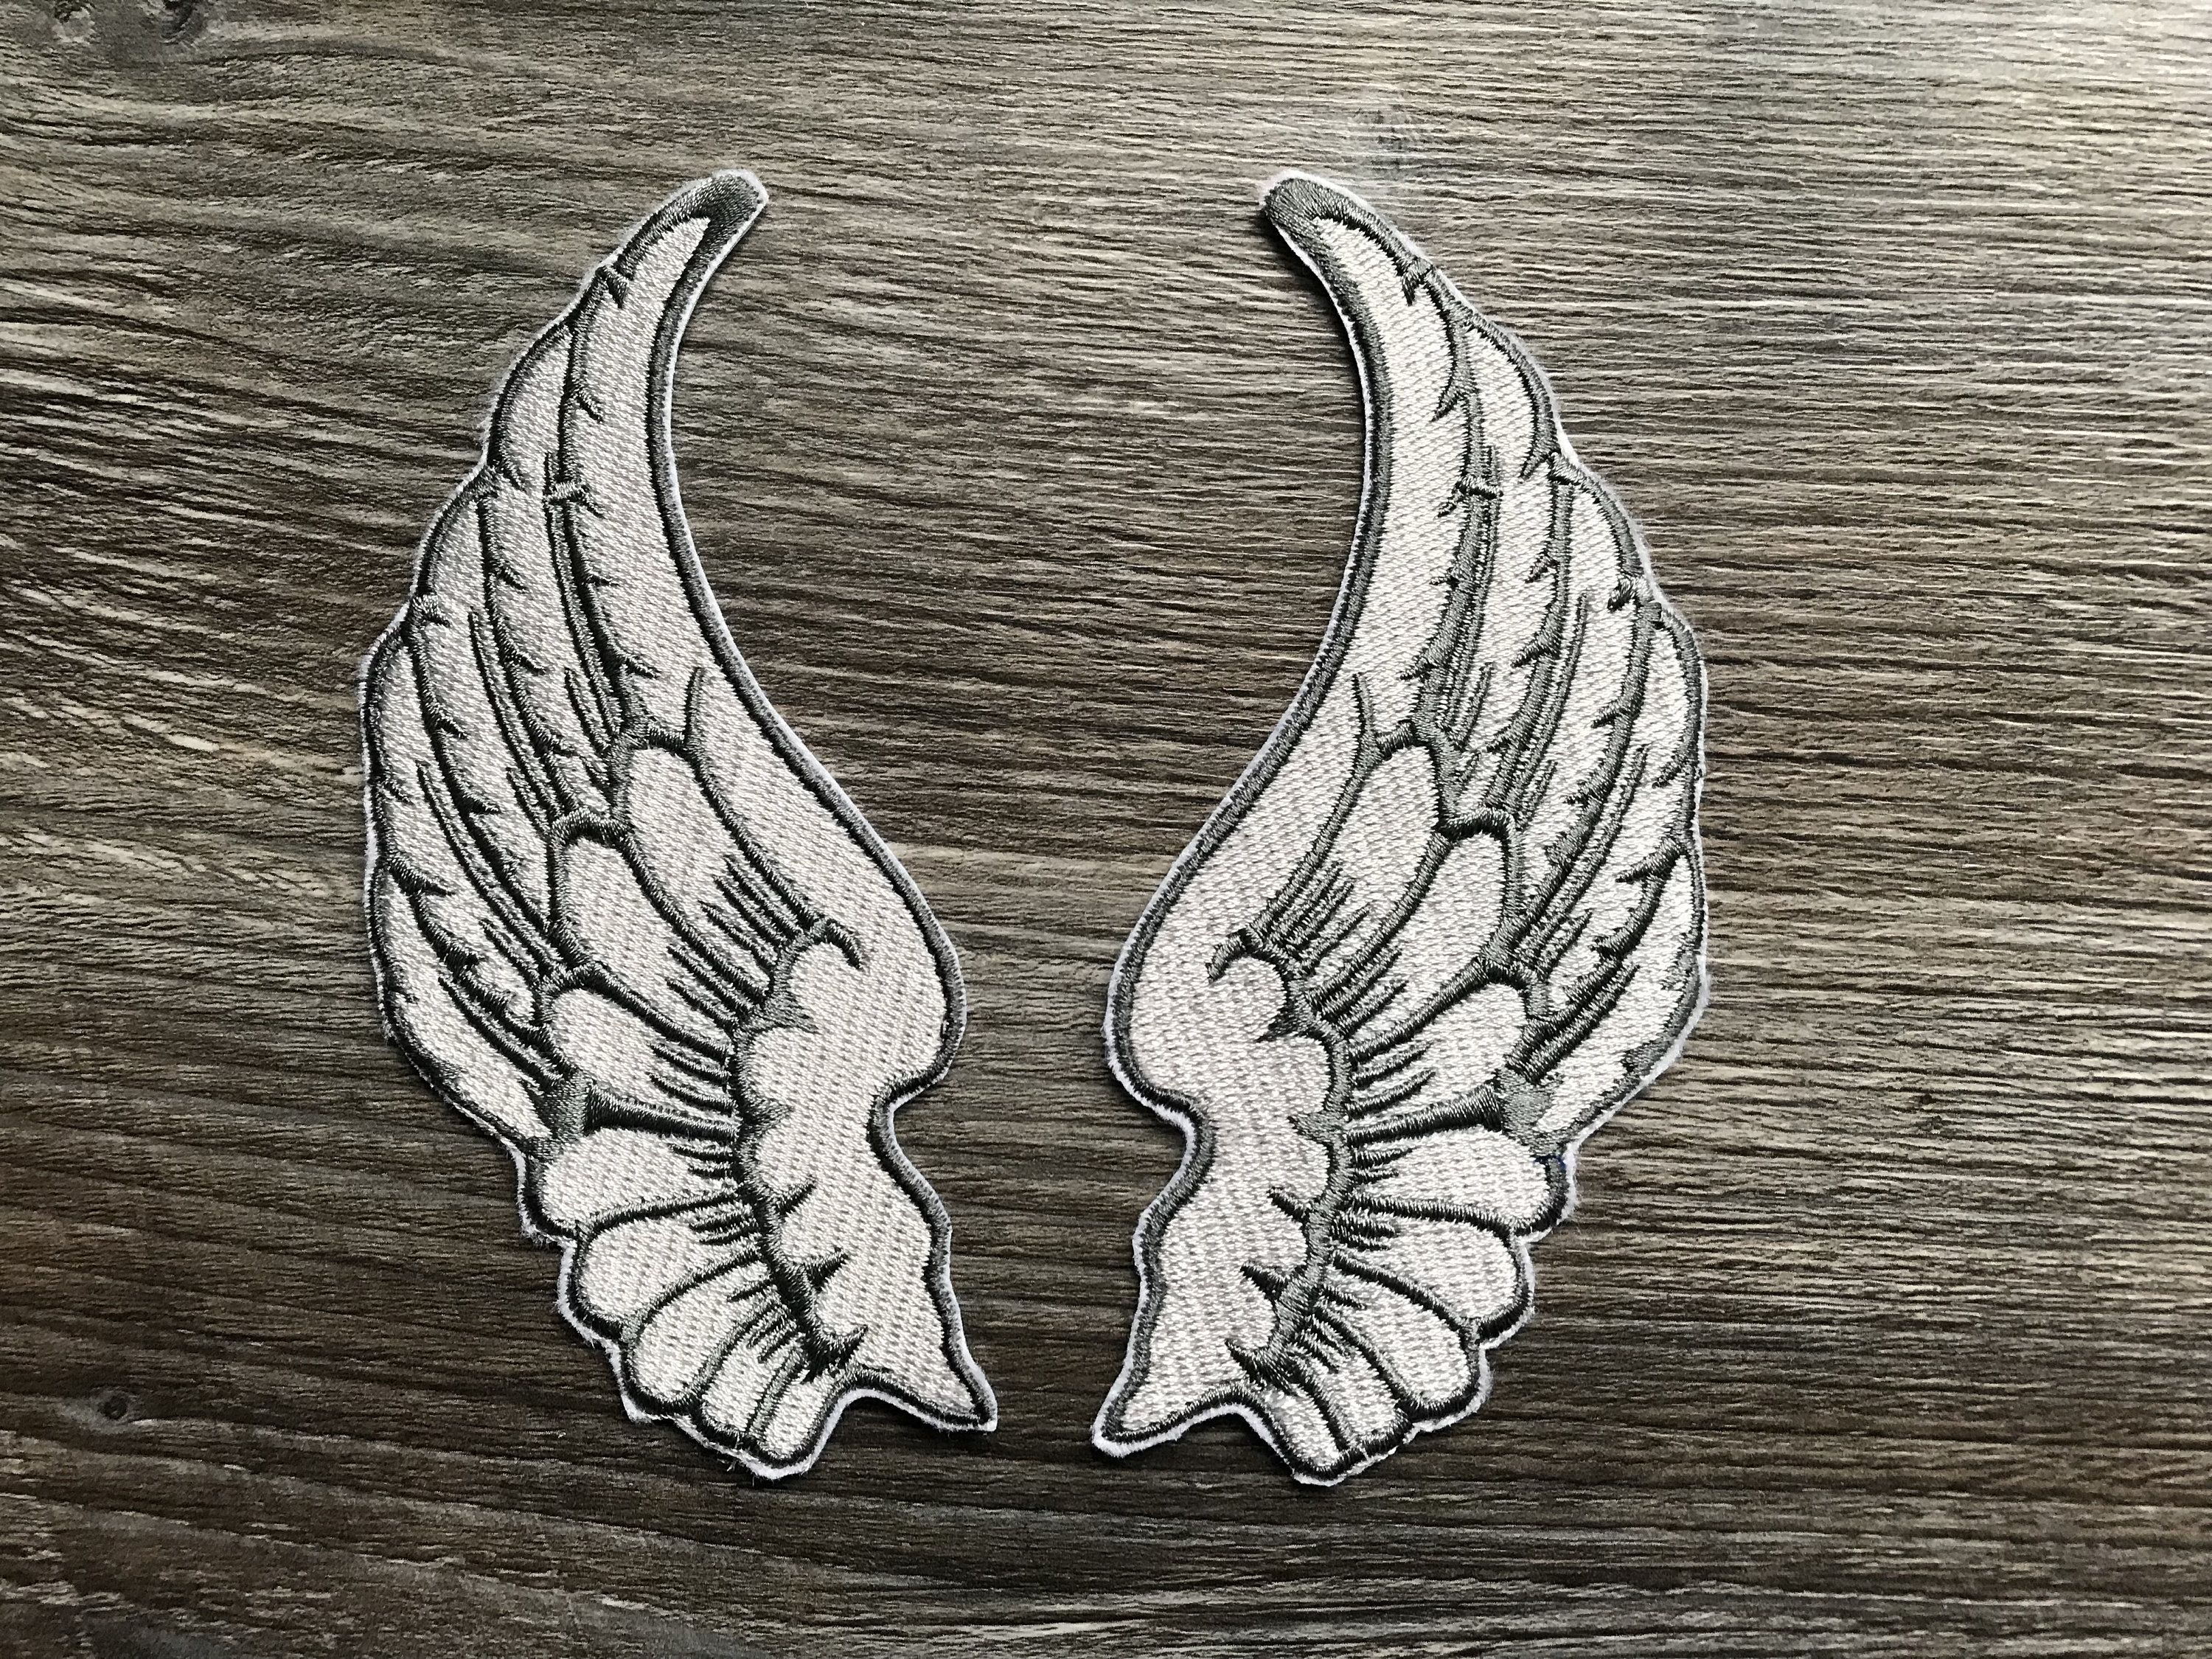 Abaodam 18pcs Angel Wings Accessories Angel Wing Ornament Bat Stickers  Wings Patches DIY Accessary Wing DIY Crafts Wing Iron on Patch Fabric Wings